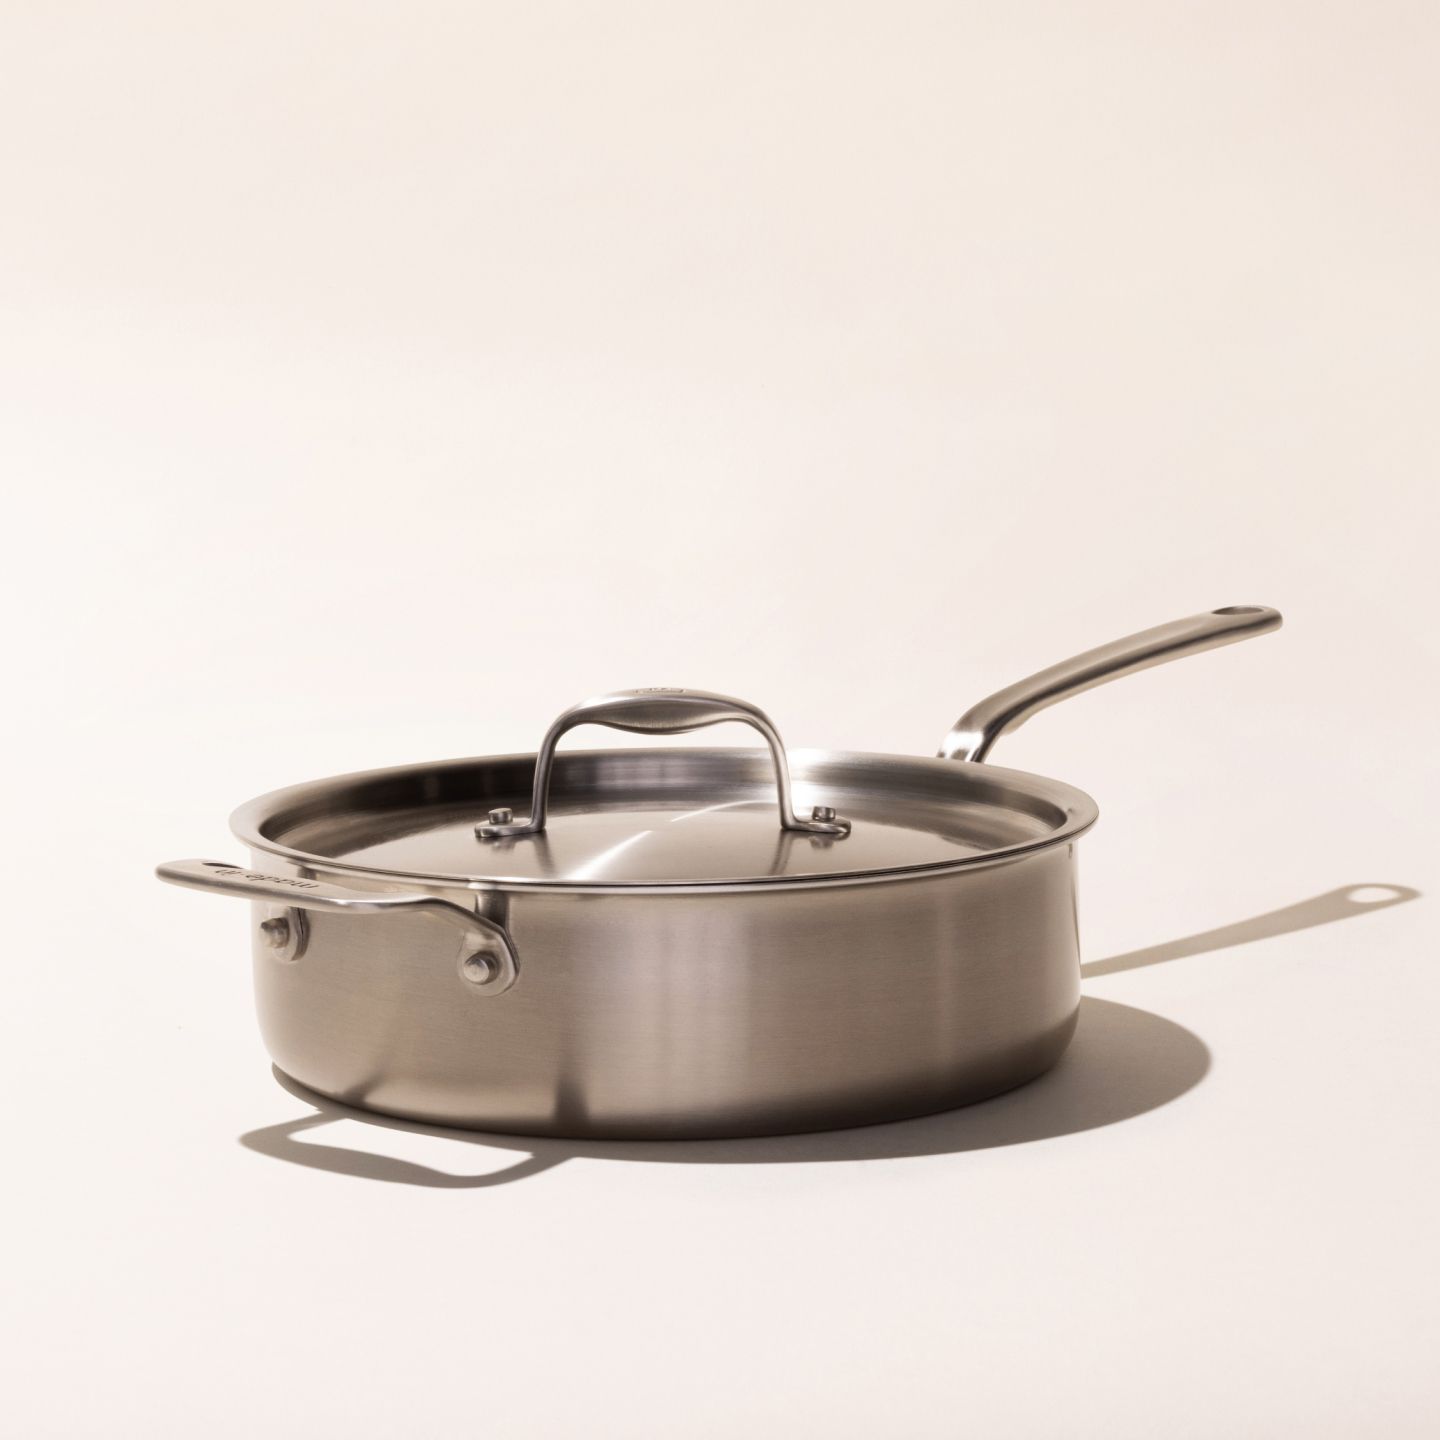 All-Clad 4202 Tri-Ply Stainless-Steel Non-Stick 2-qt Sauce Pan